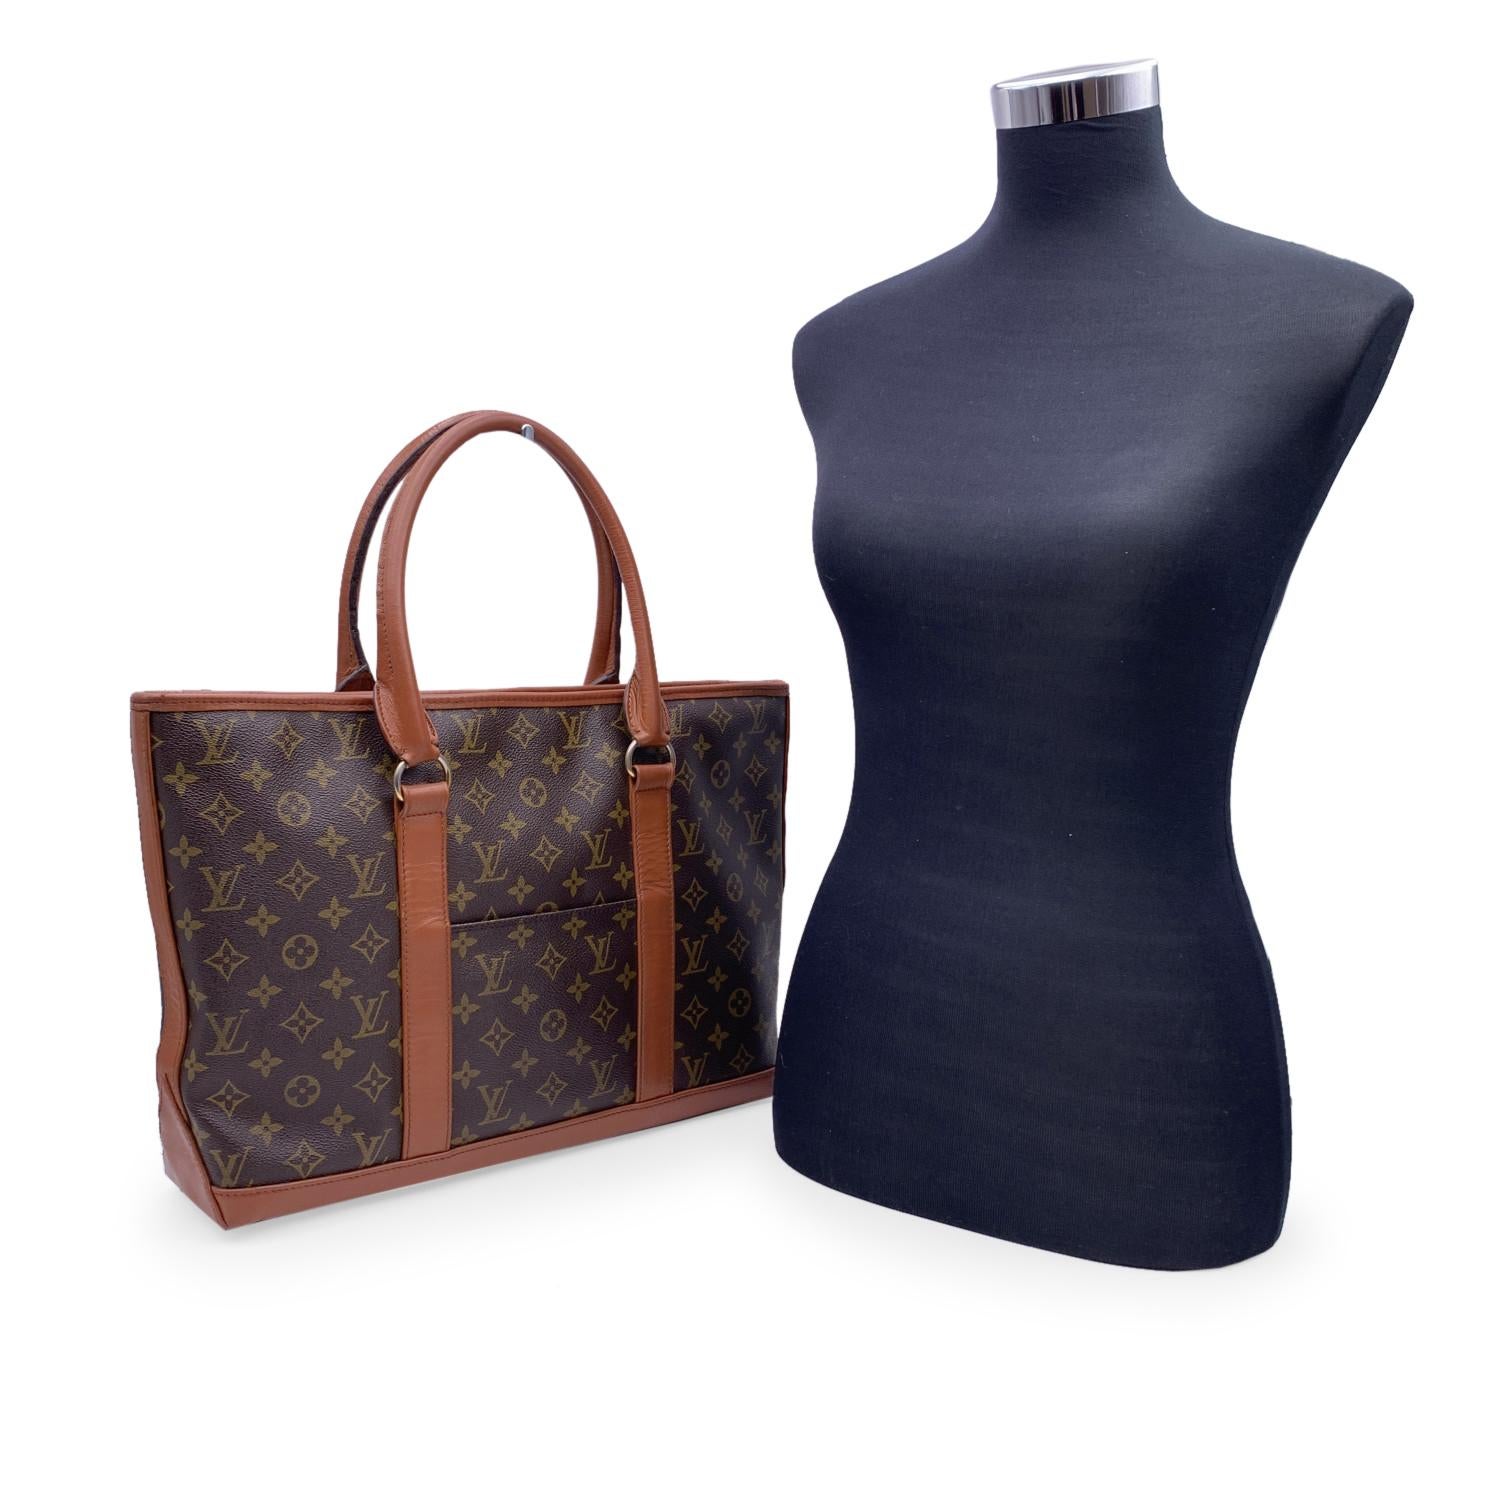 Vintage LOUIS VUITTON 'Weekend' tote bag in timeless monogram canvas with brown genuine leather trim and handles. Discontinued in the early 1990's. 1 open pocket on the front and 1 open pocket on the back. Open top. 1 inside zippered pocket and 5